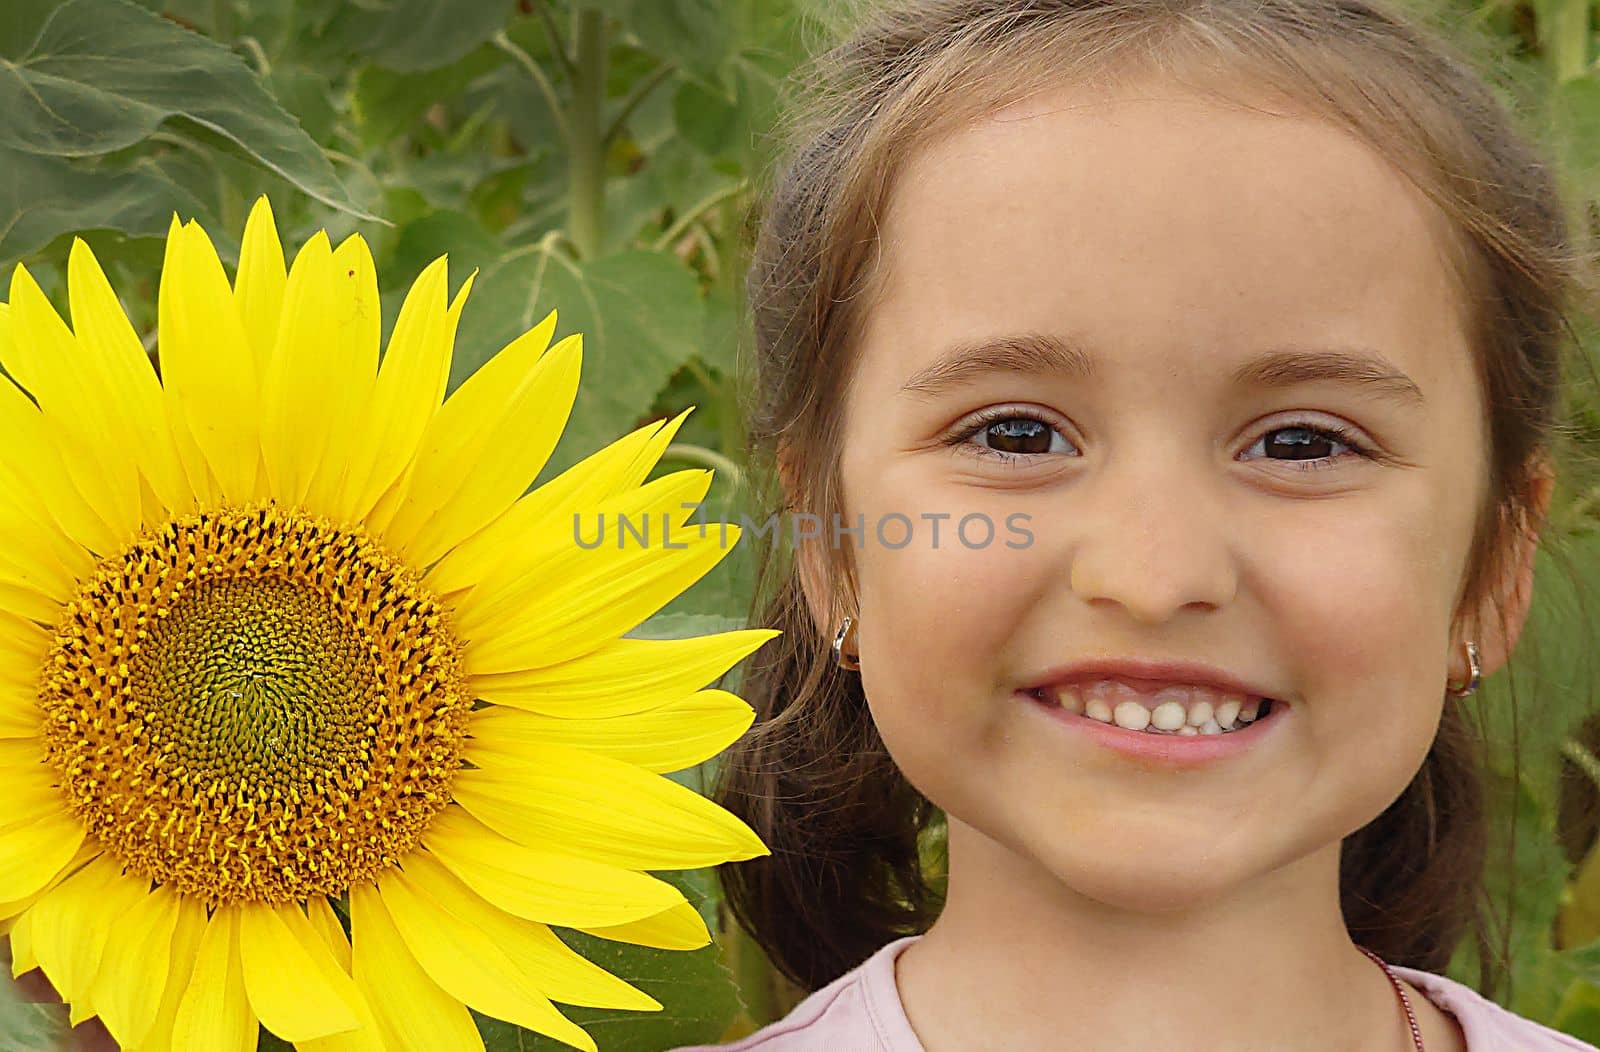 A girl with a smile stands next to a yellow sunflower on a summer day close-up